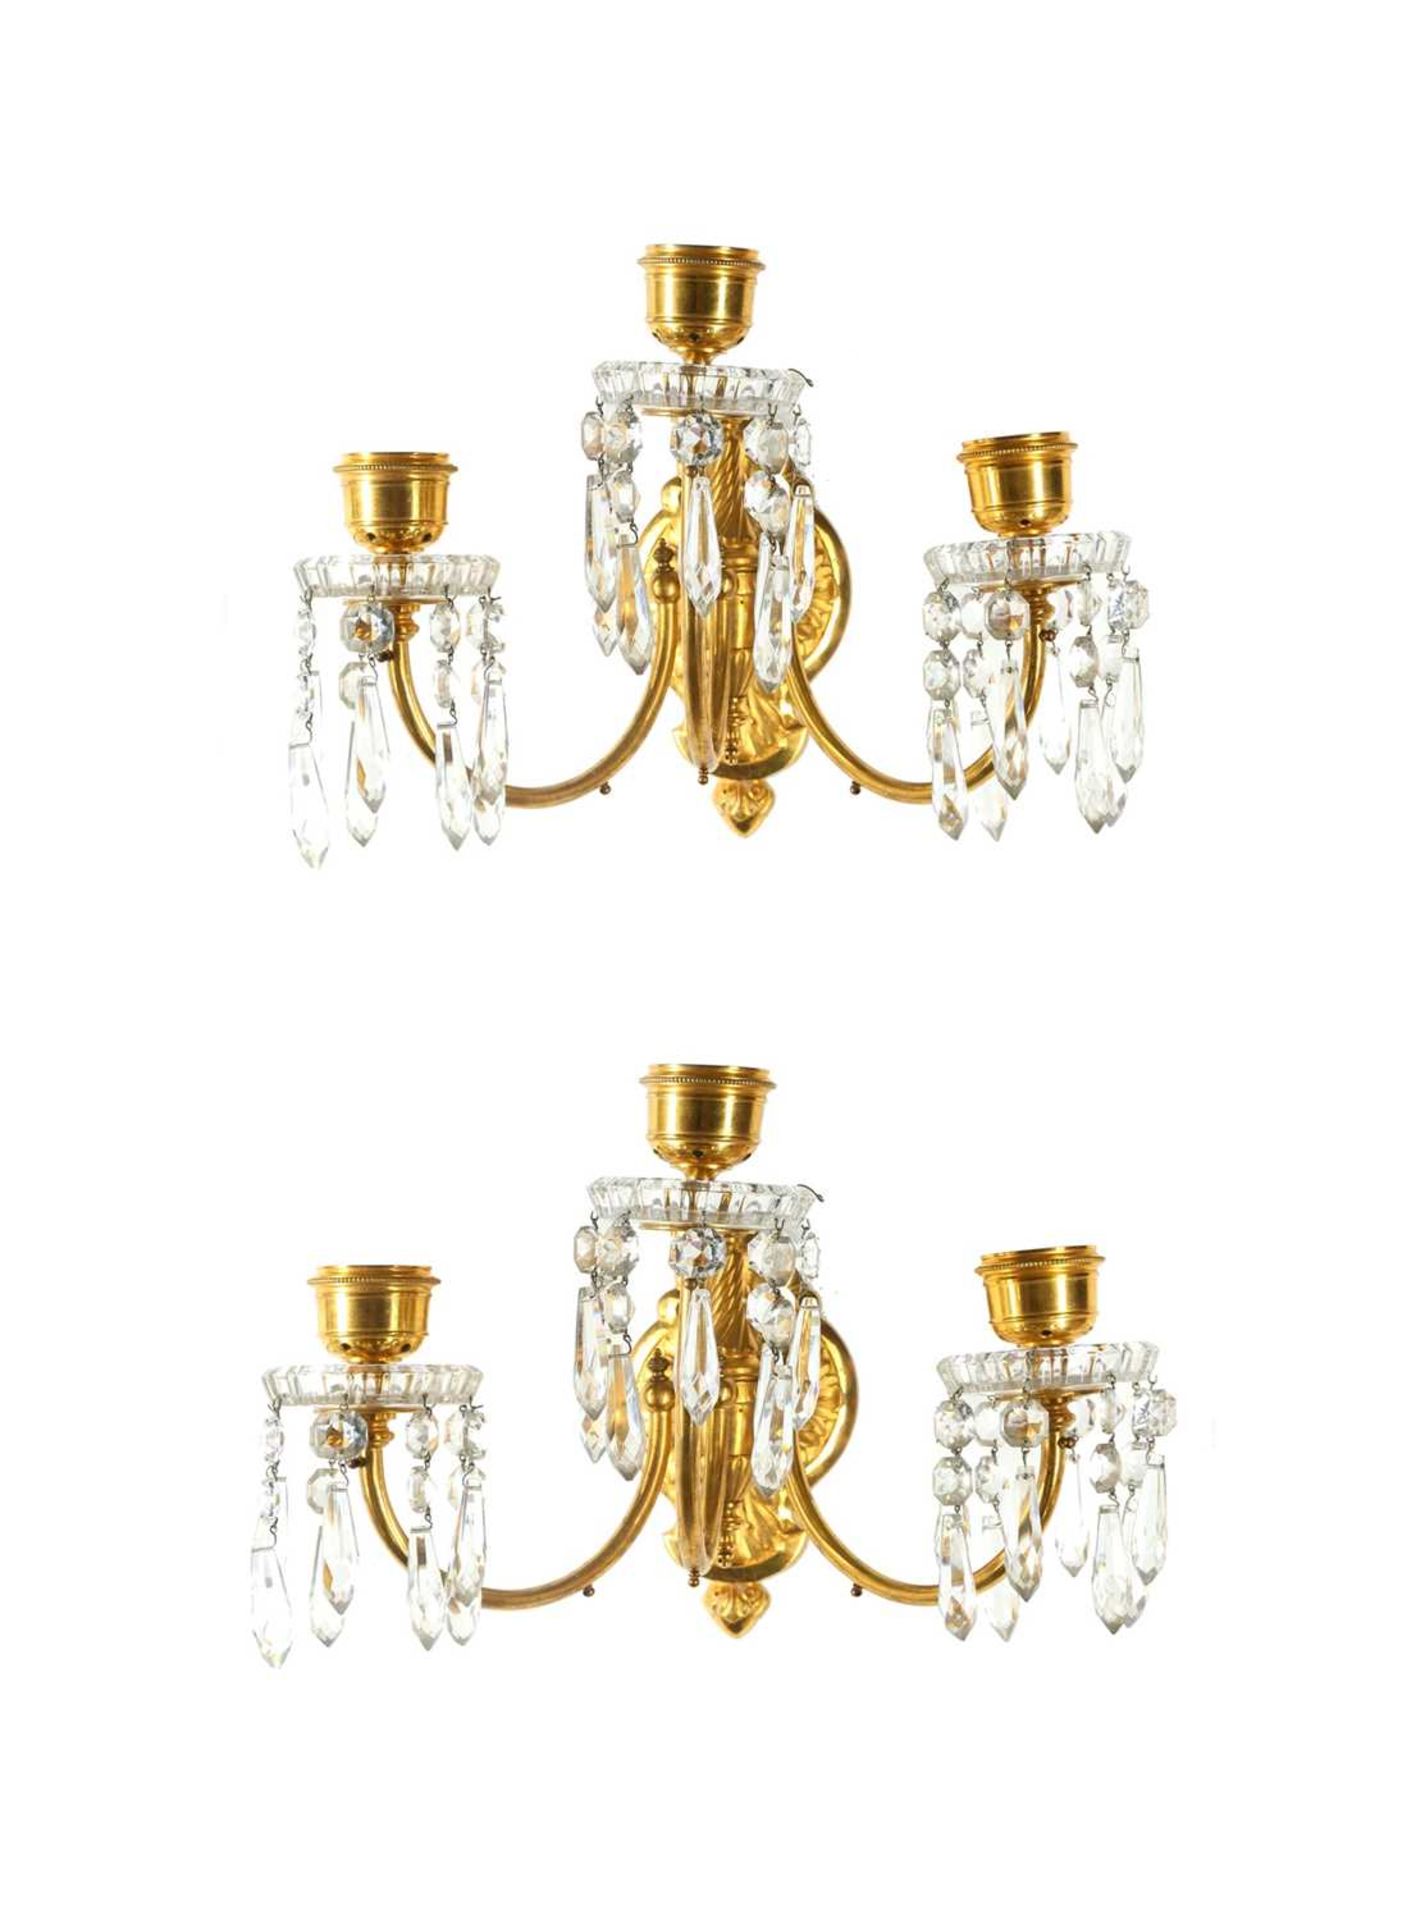 BACCARAT: A PAIR OF LATE 19TH / EARLY 20TH CENTURY GILT BRONZE AND CRYSTAL WALL LIGHTS